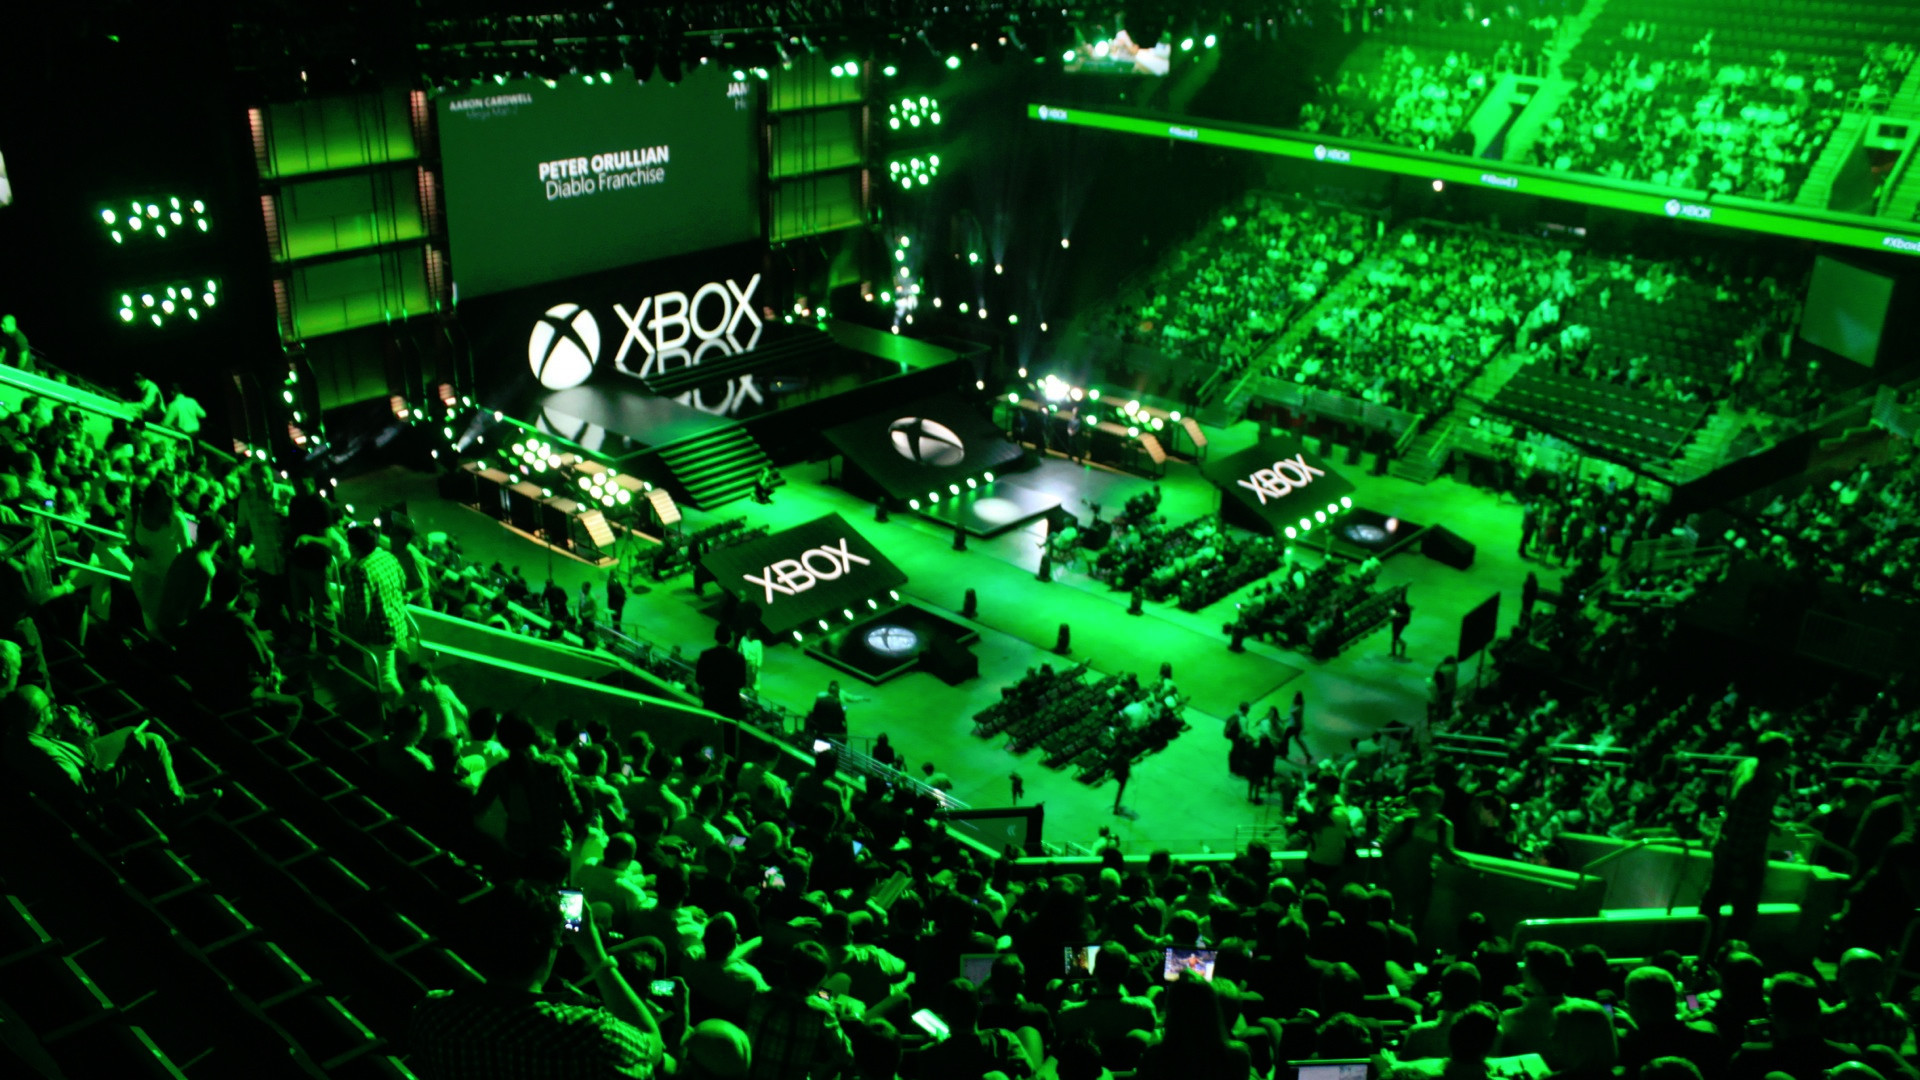 What could a future Xbox E3/ Game Showcase possibly look like? - Gaming -  XboxEra